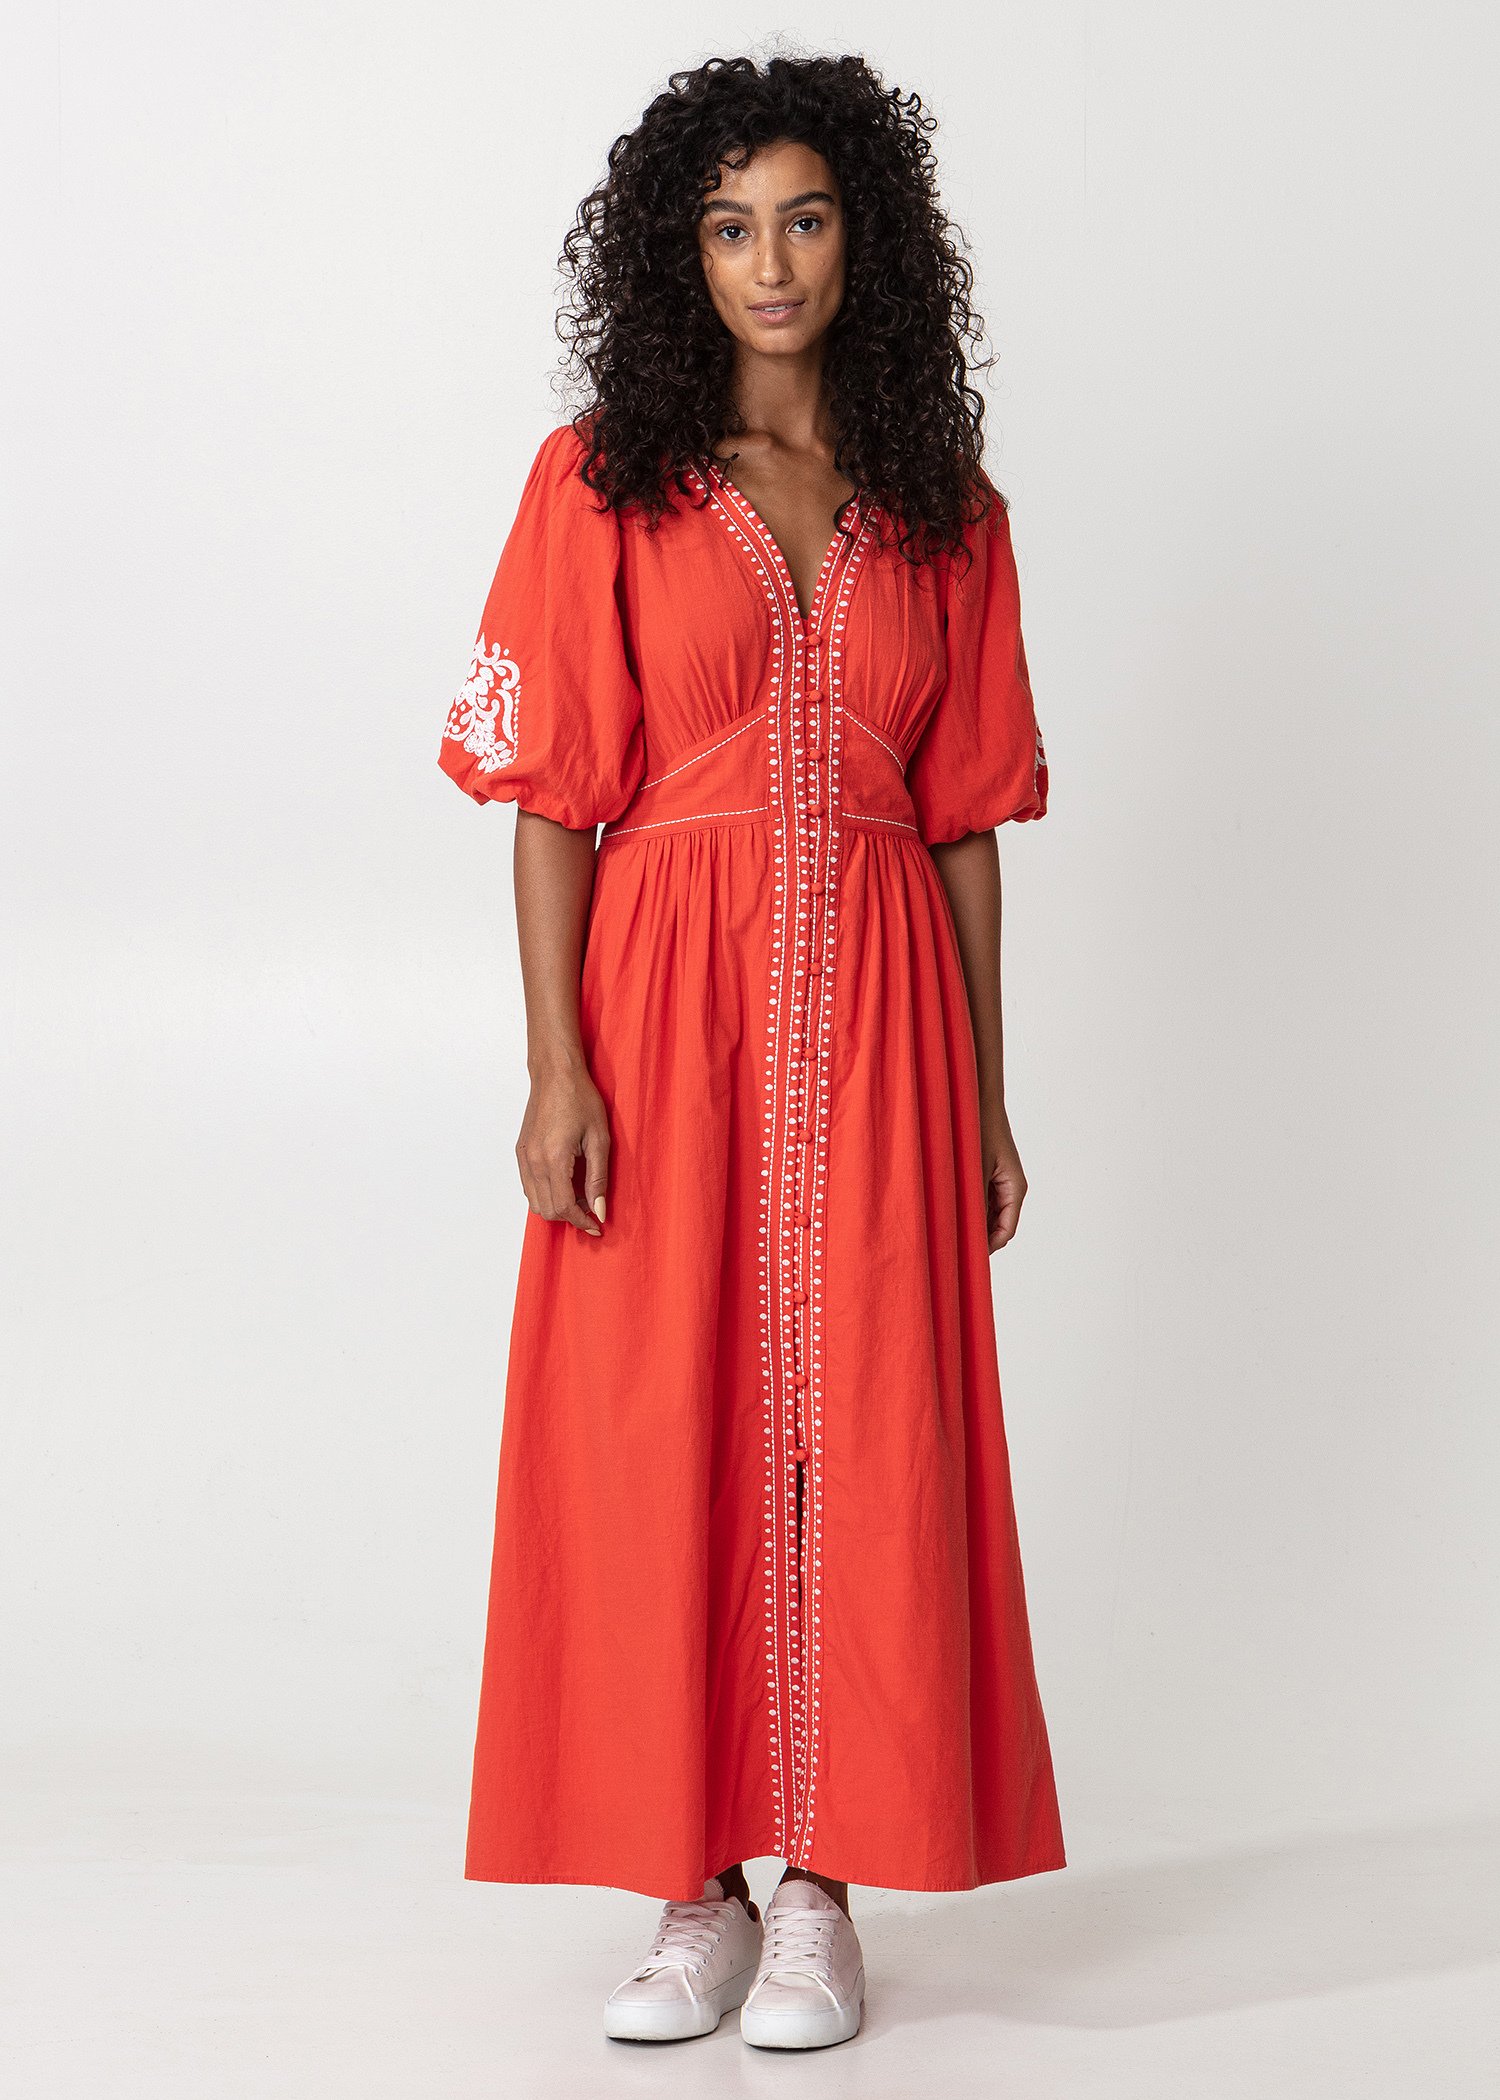 Embroidered maxi dress